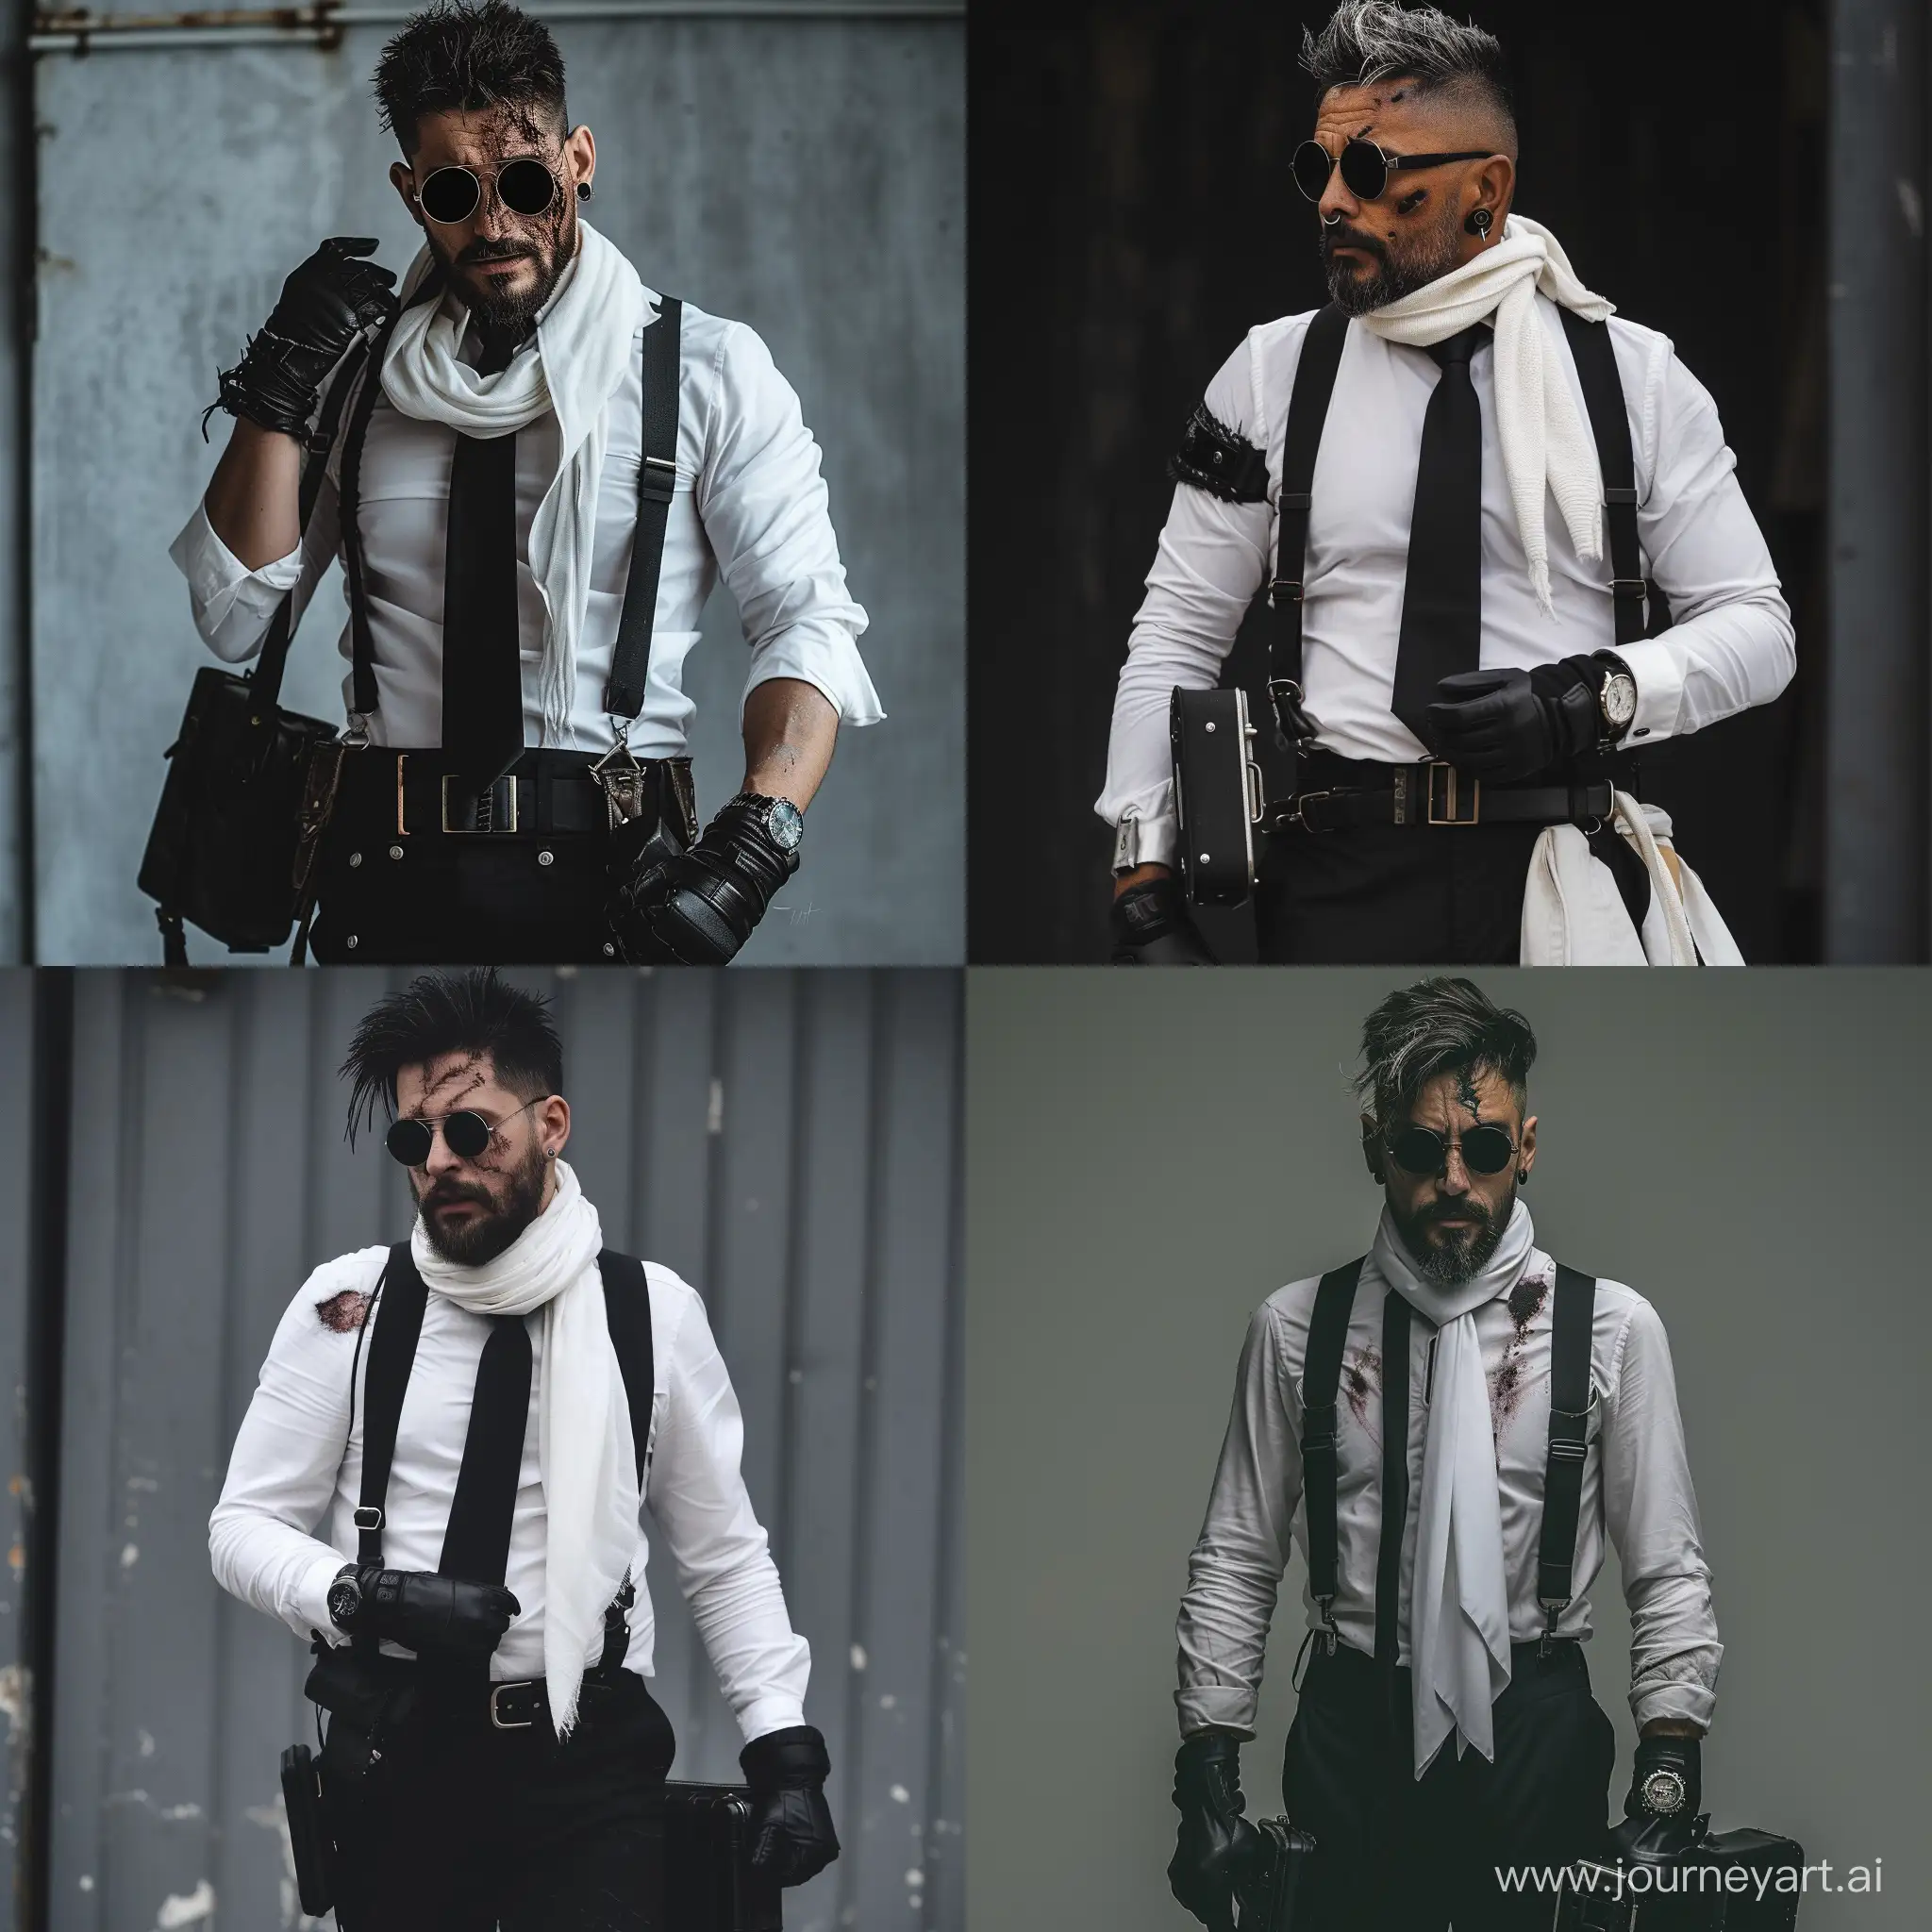 Stylish-Man-with-Black-Case-and-Scarf-in-White-Shirt-and-Trousers